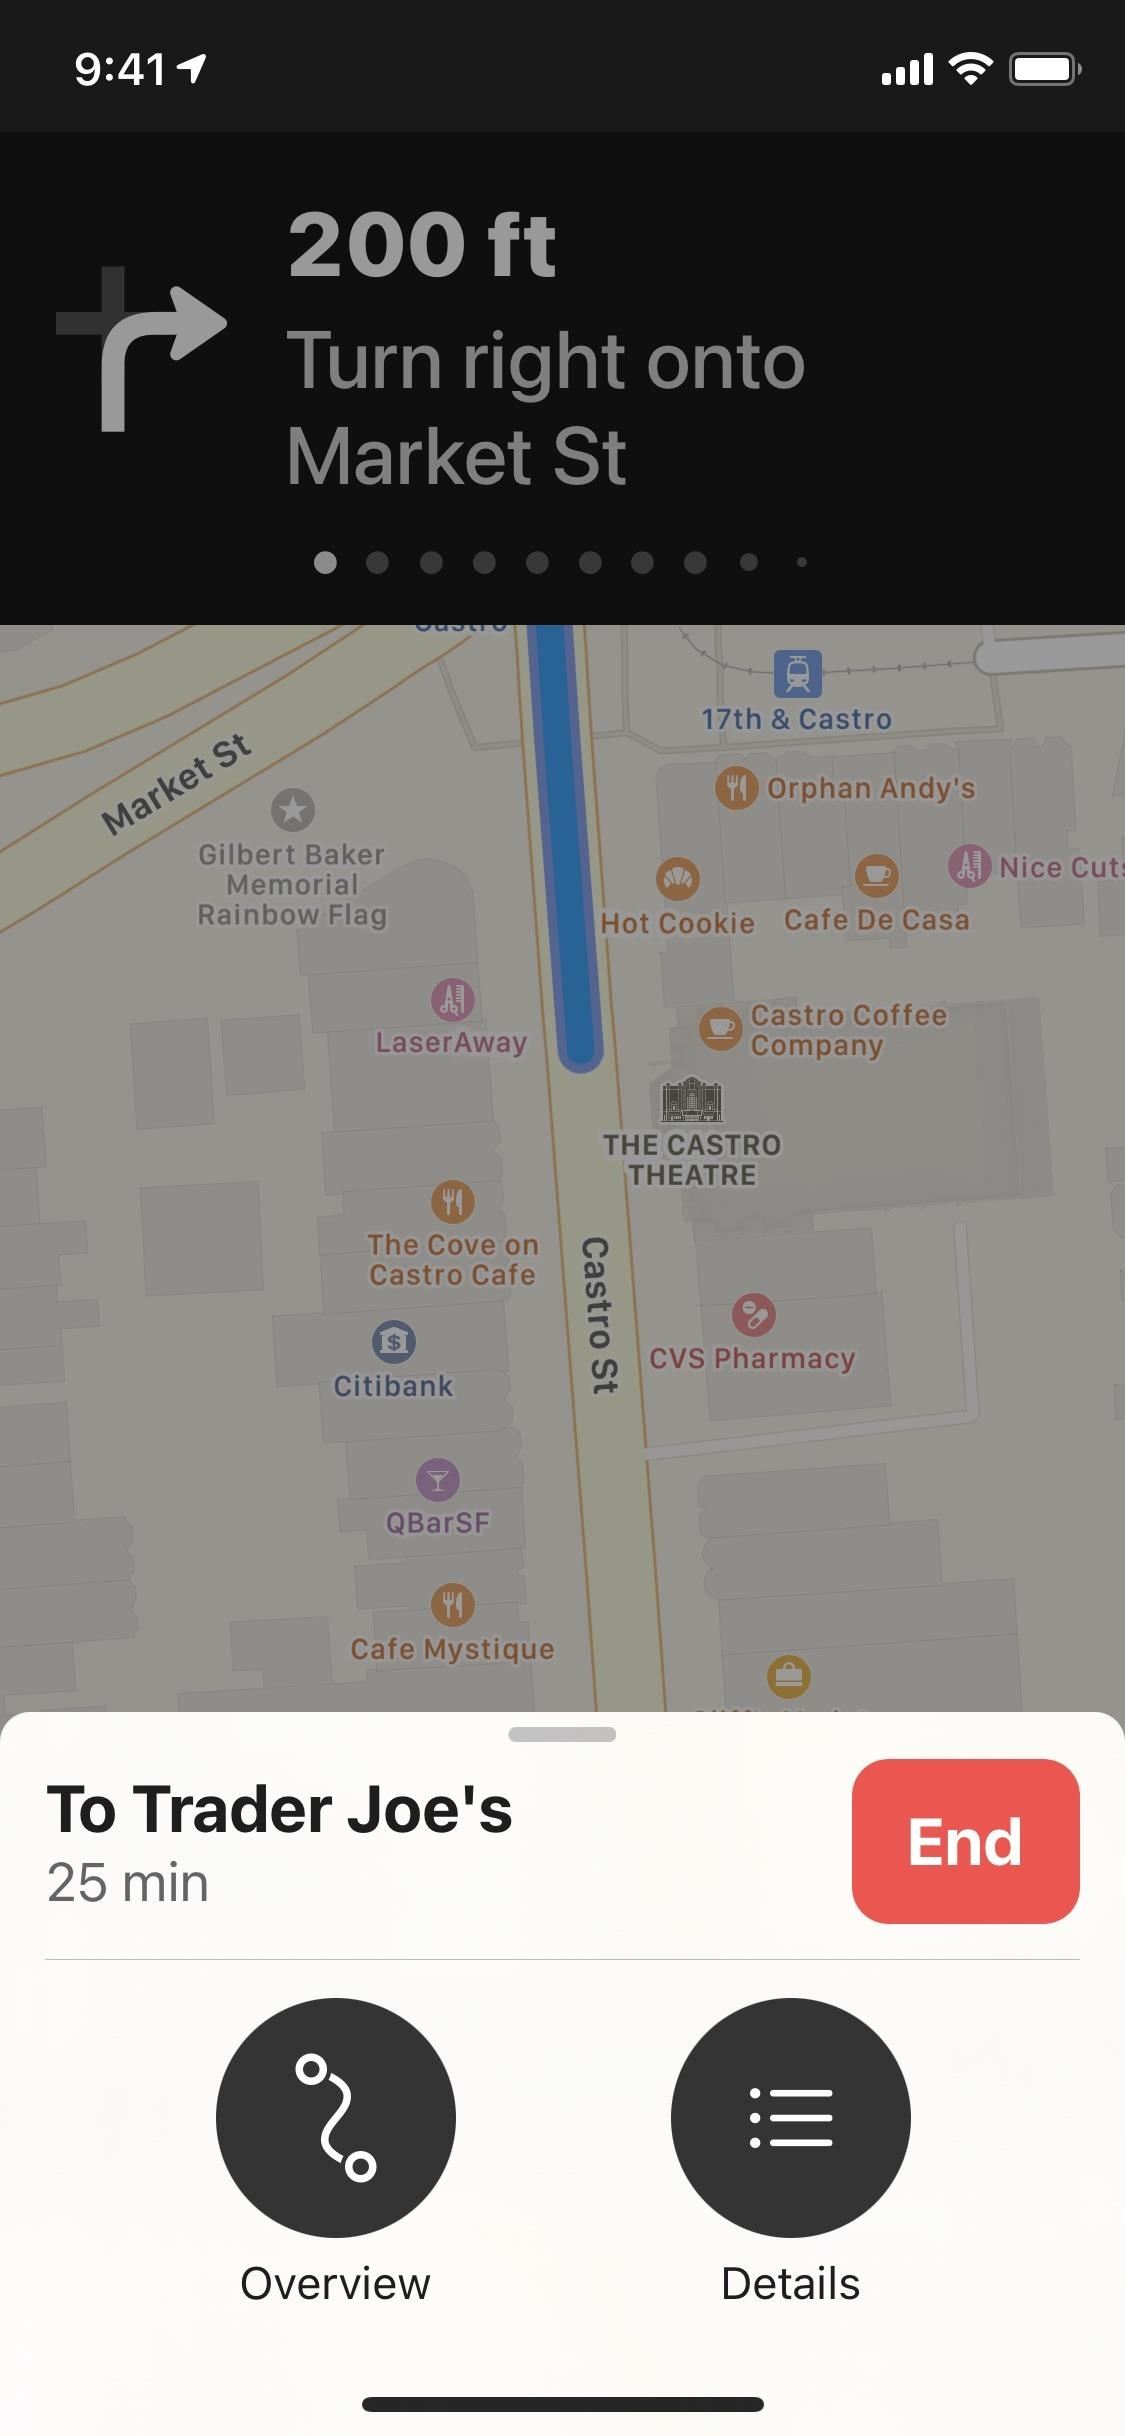 16 New Apple Maps Features for iPhone in iOS 14, Including Cycling Routes, New Widgets & City Guides